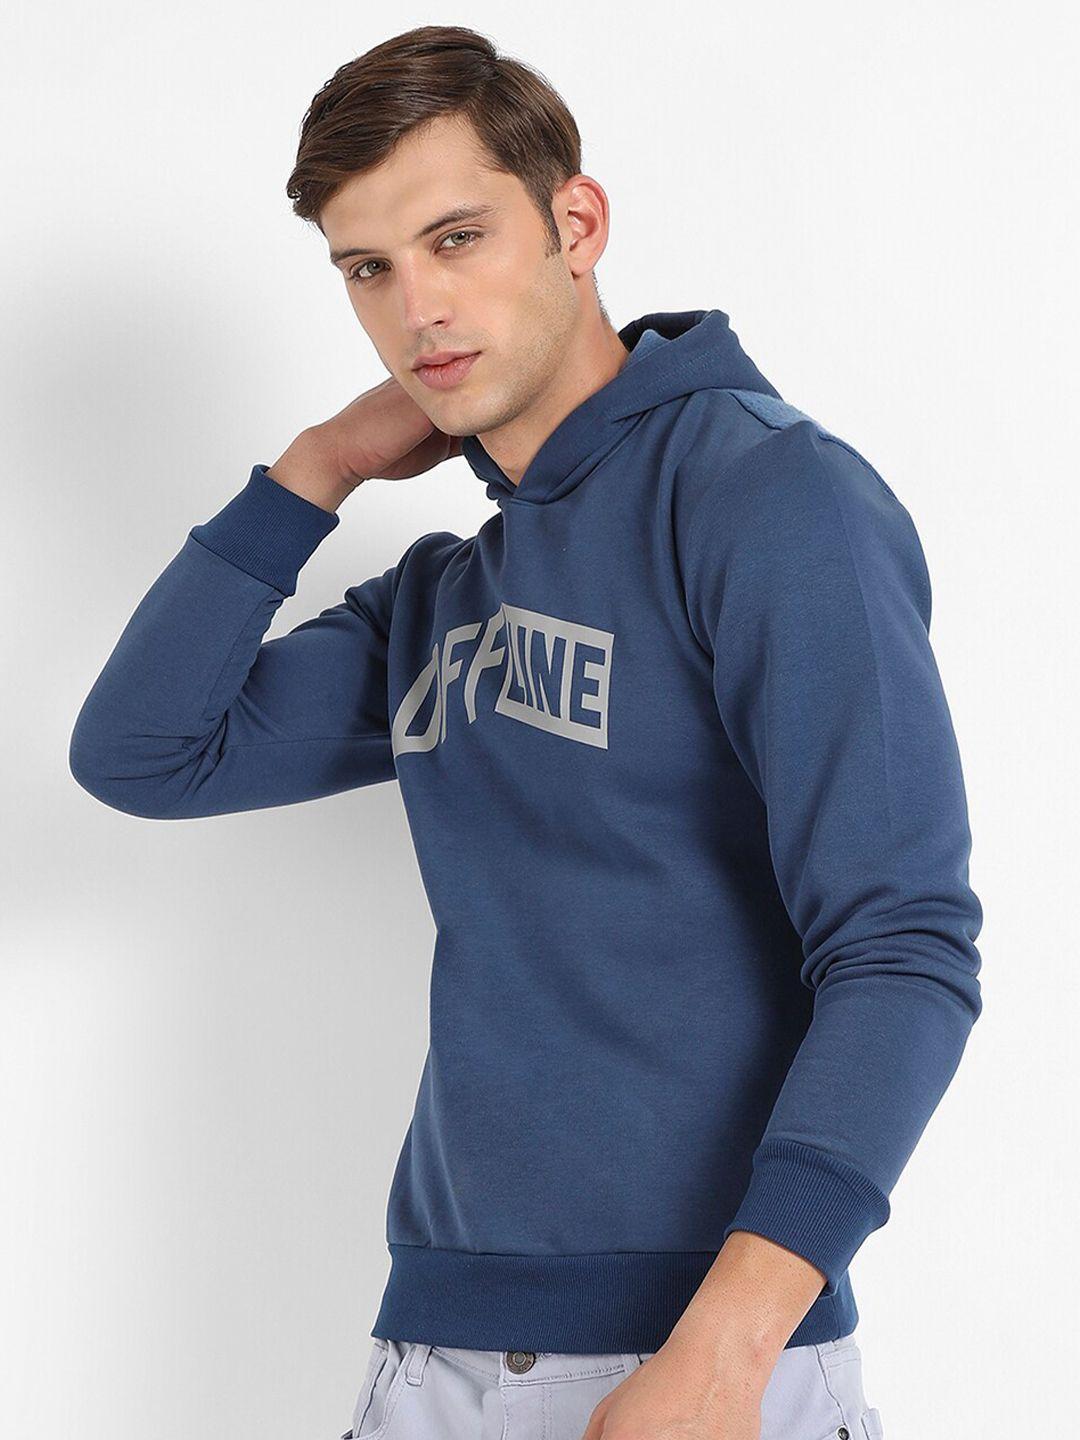 campus sutra typographic printed hooded cotton pullover sweatshirt